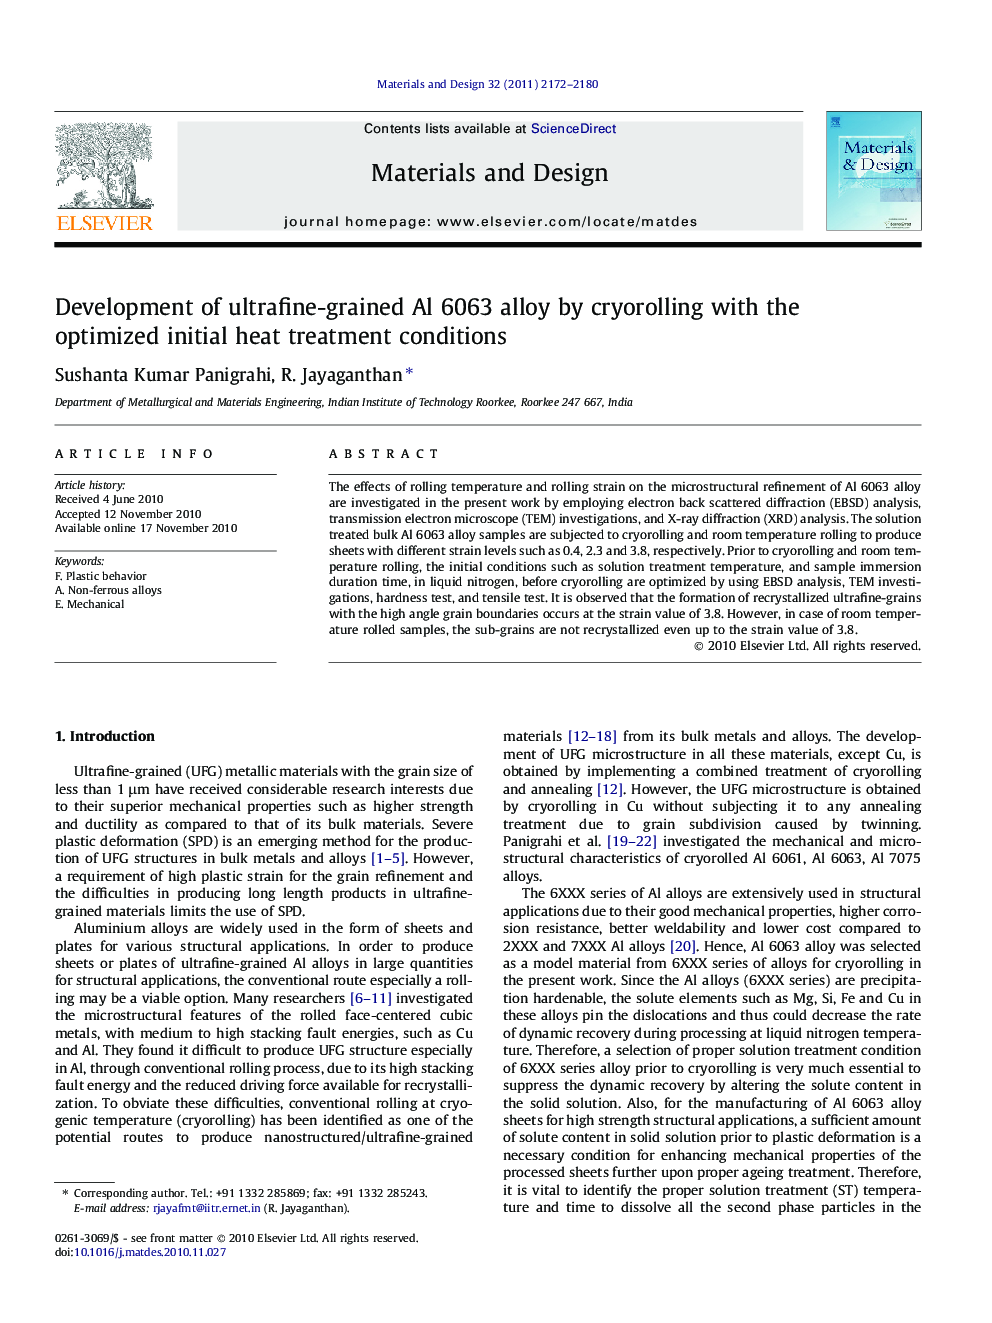 Development of ultrafine-grained Al 6063 alloy by cryorolling with the optimized initial heat treatment conditions